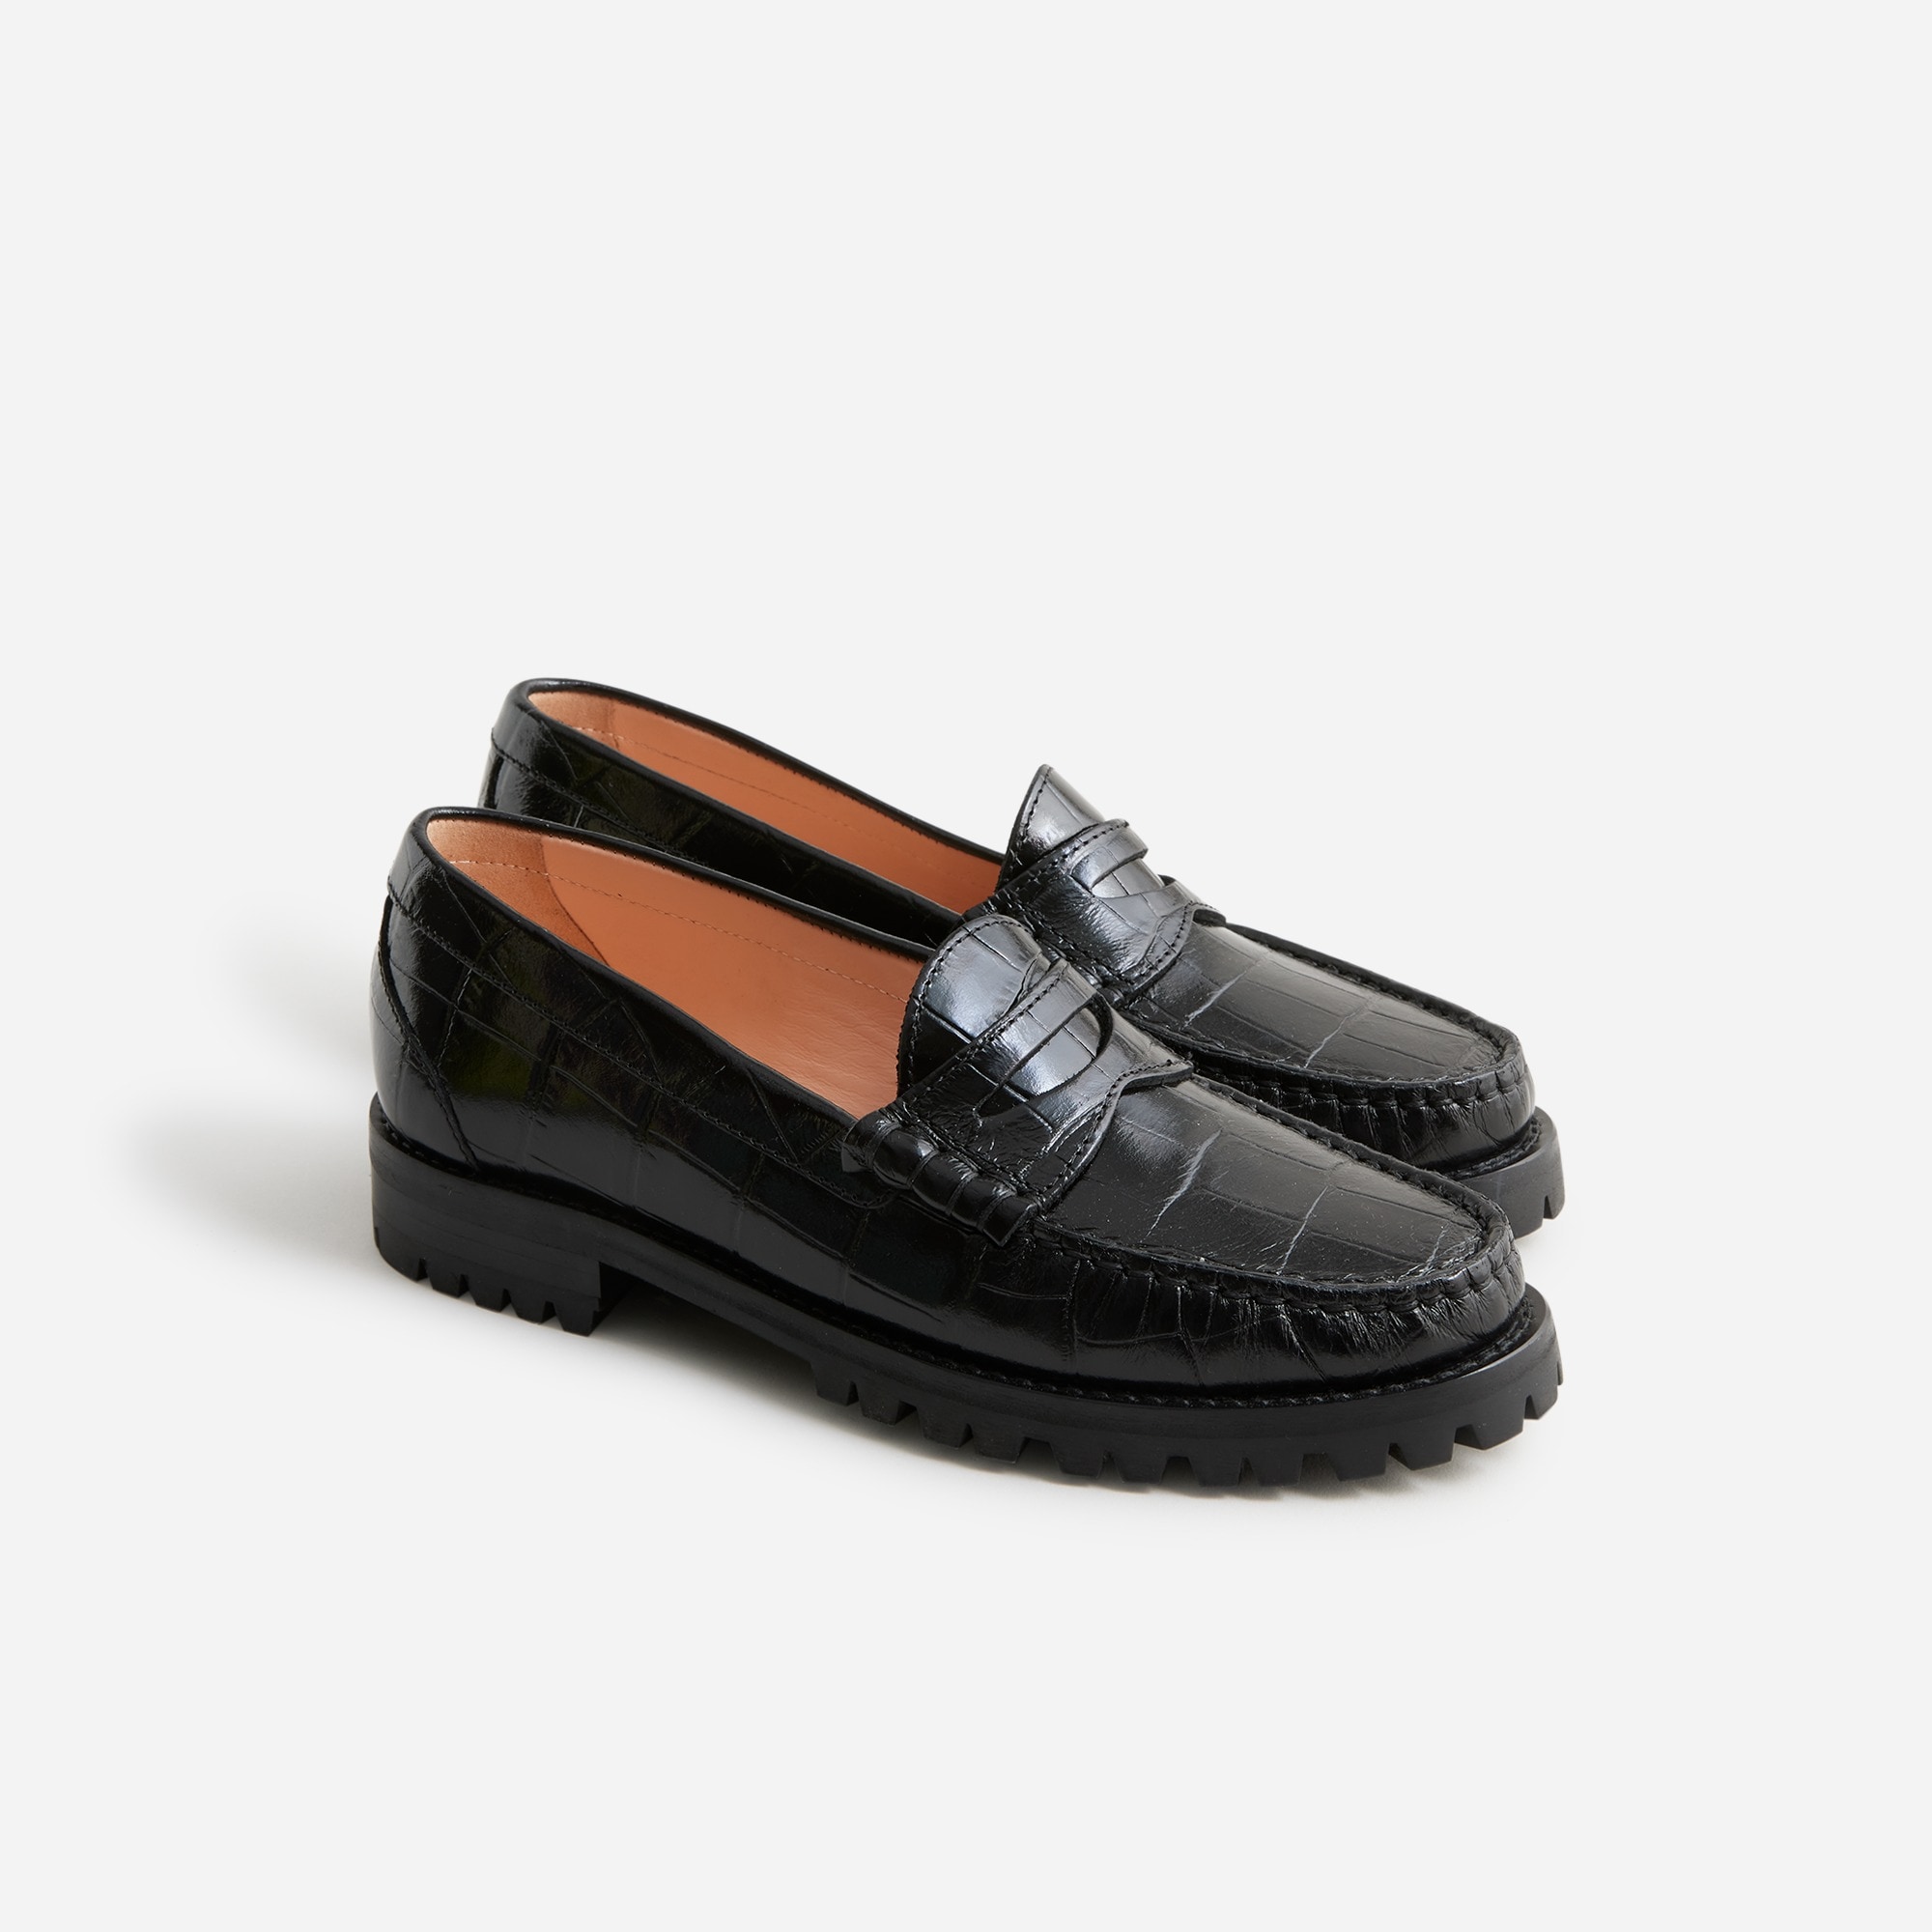  Winona lug-sole penny loafers in croc-embossed leather